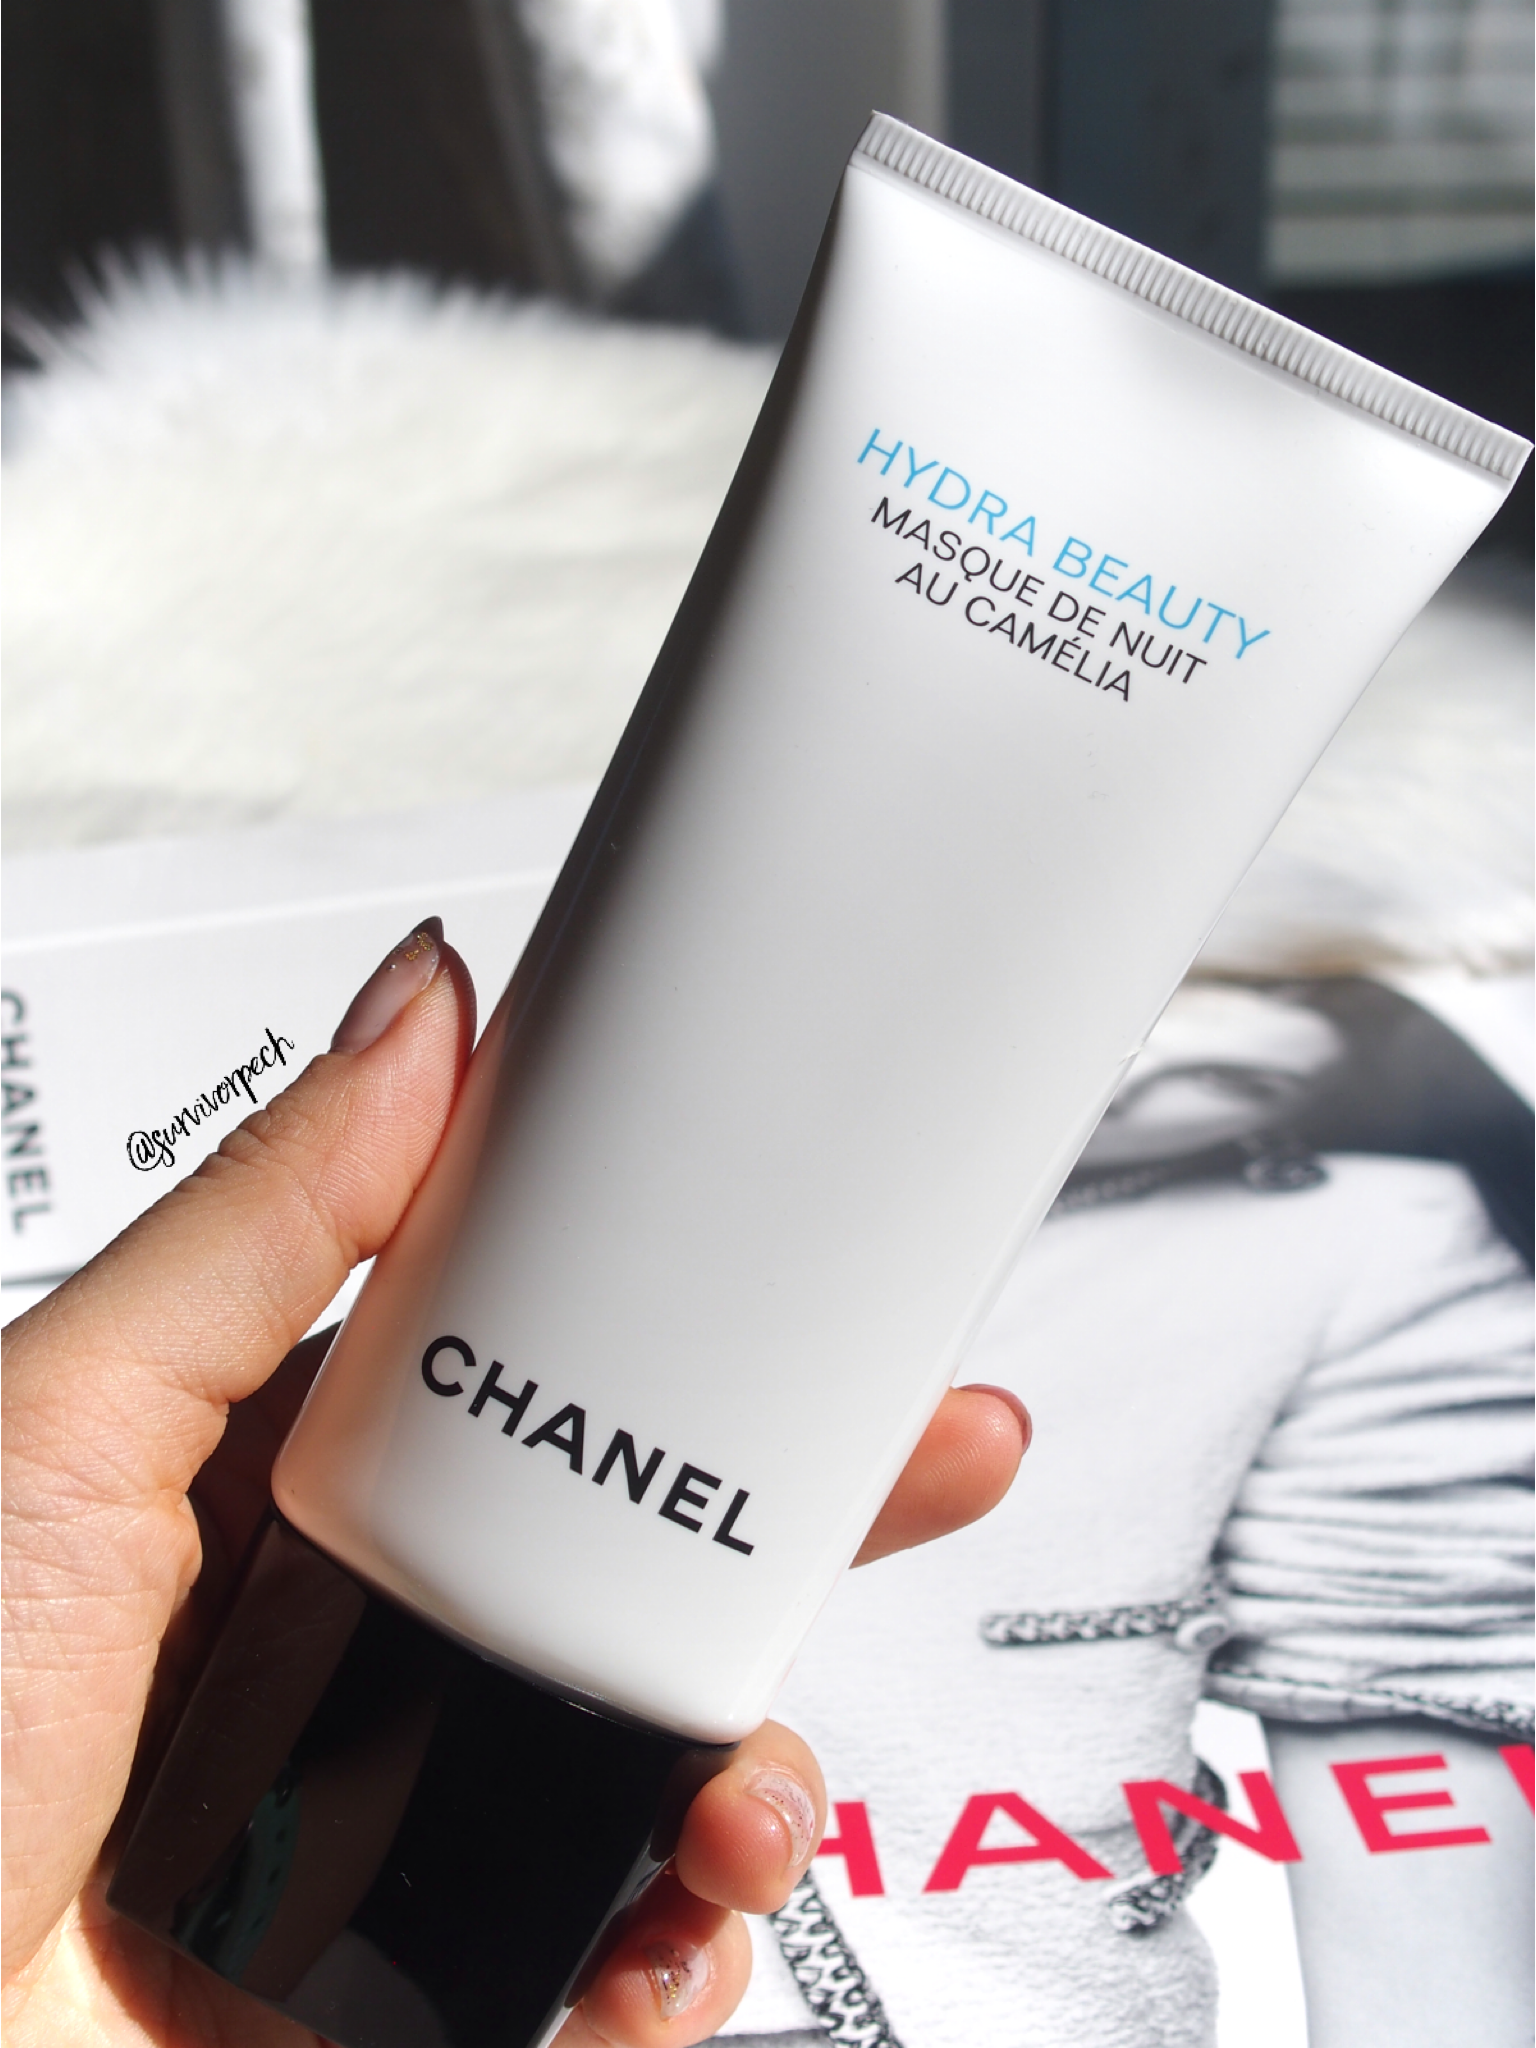 Chanel Skincare Review: Hydra Beauty Lotion, Gel Creme, Overnight Mask, Le  Lift Smoothing and Firming Serum, No.5 L'Eauon Hand Cream — Survivorpeach